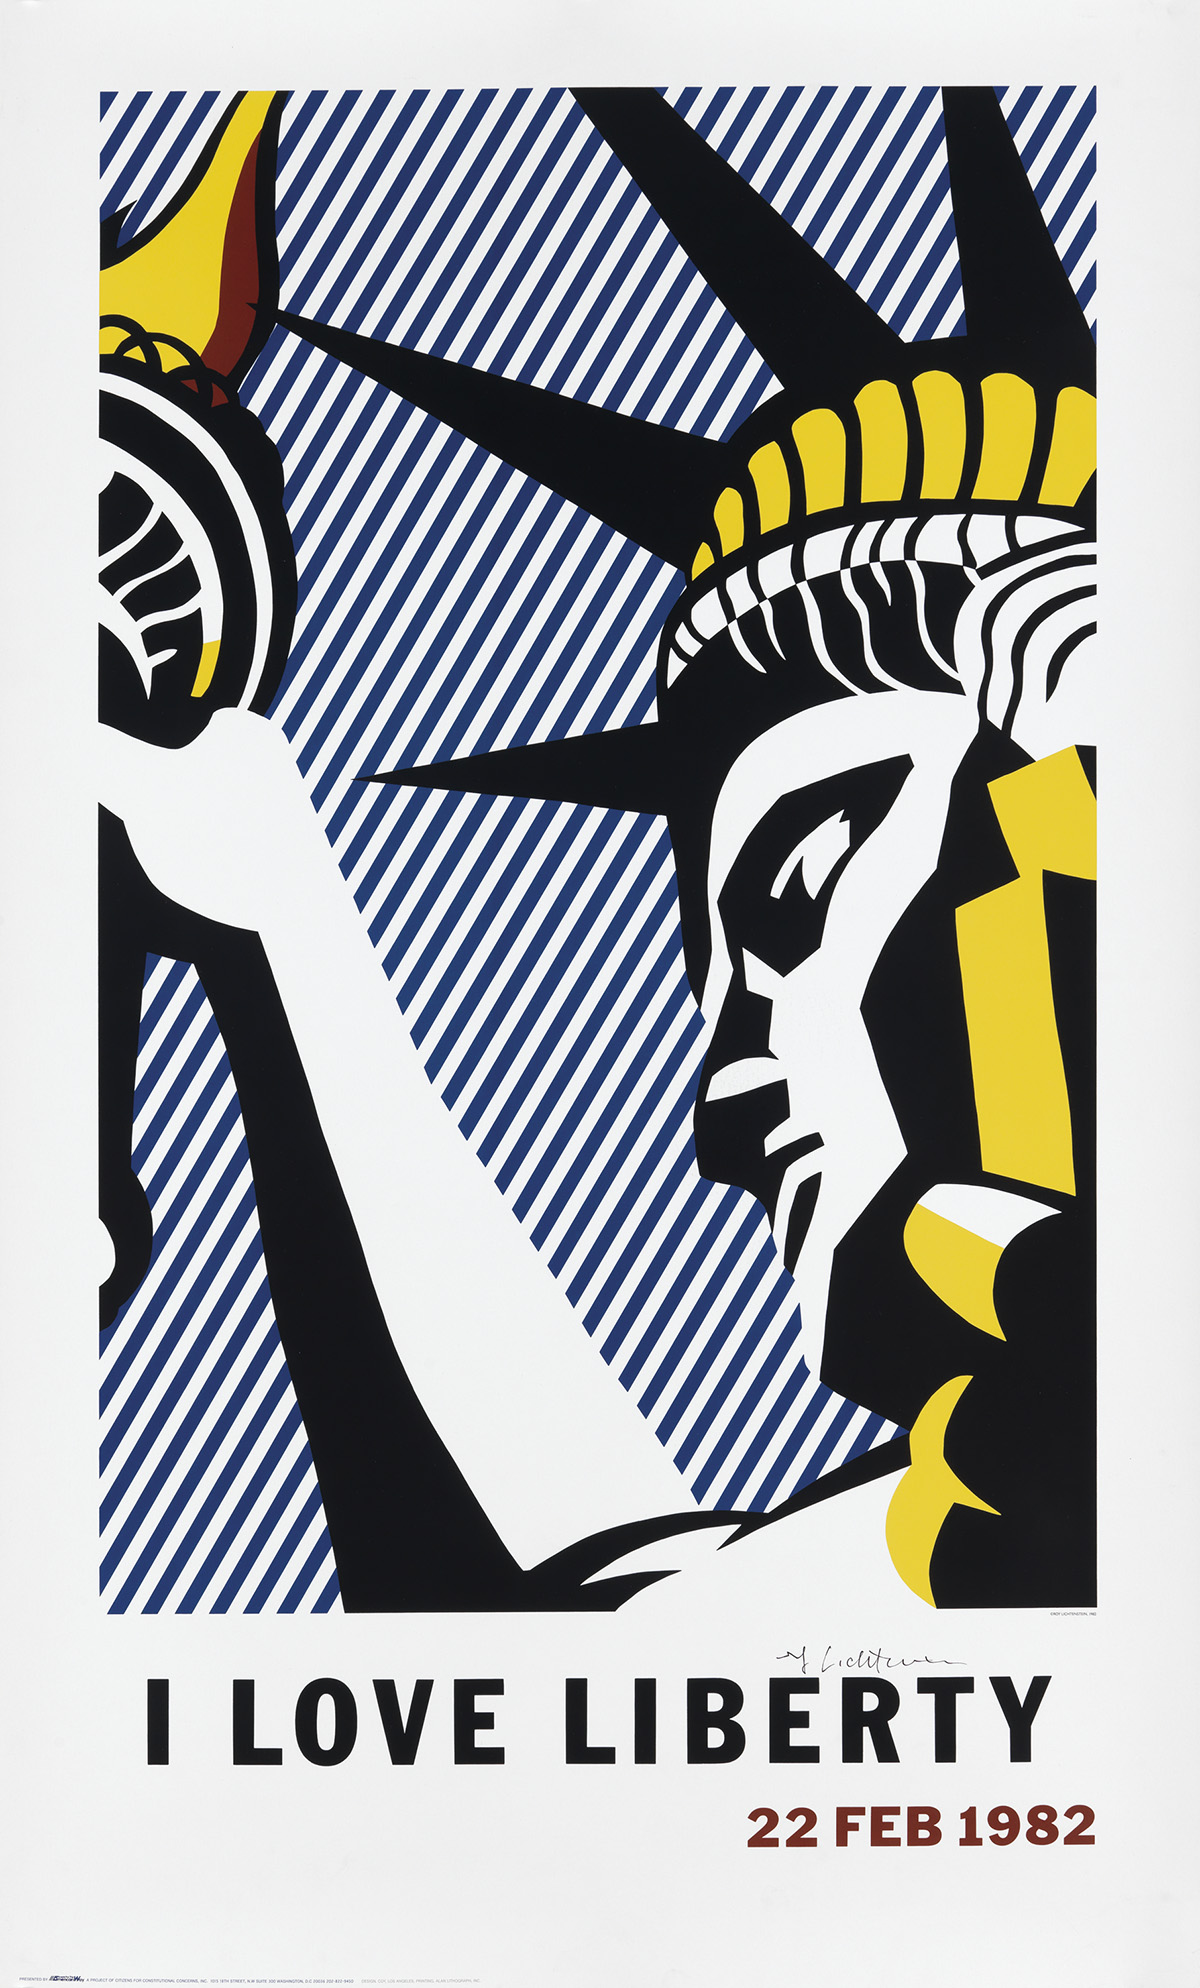 ROY LICHTENSTEIN (1923-1997). I LOVE LIBERTY. 1982. 39x23 inches, 99x59 cm. Alan Lithograph Inc., Los Angeles.